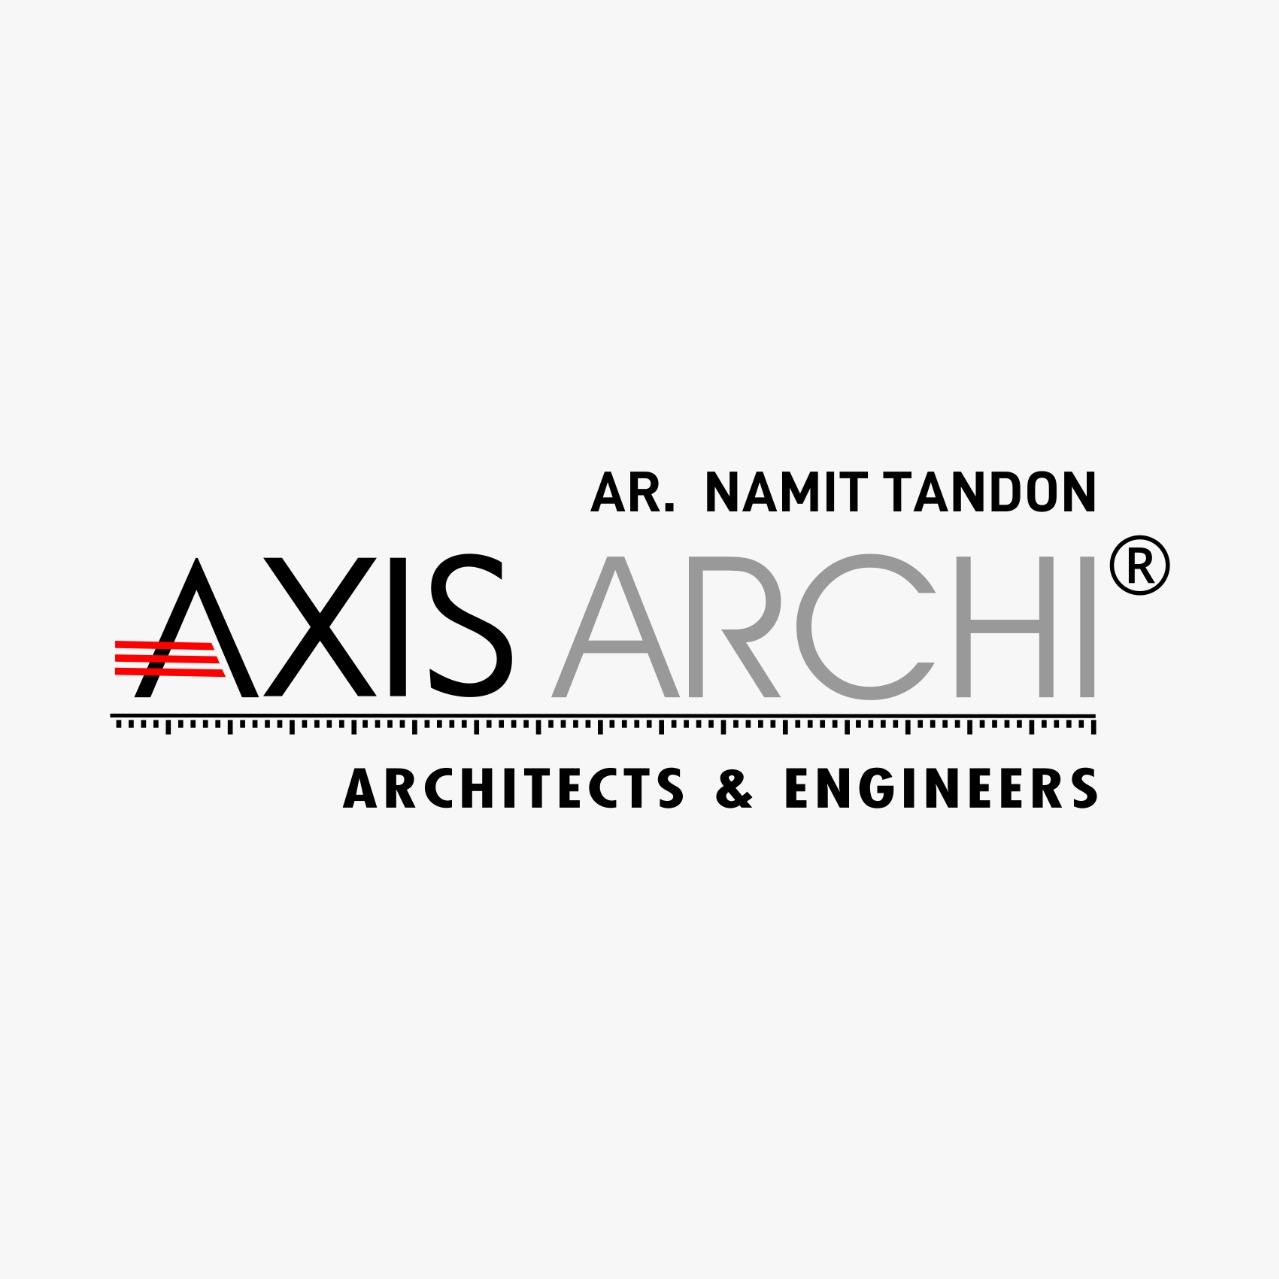 Axis Archi | Architect Namit Tandon|Legal Services|Professional Services